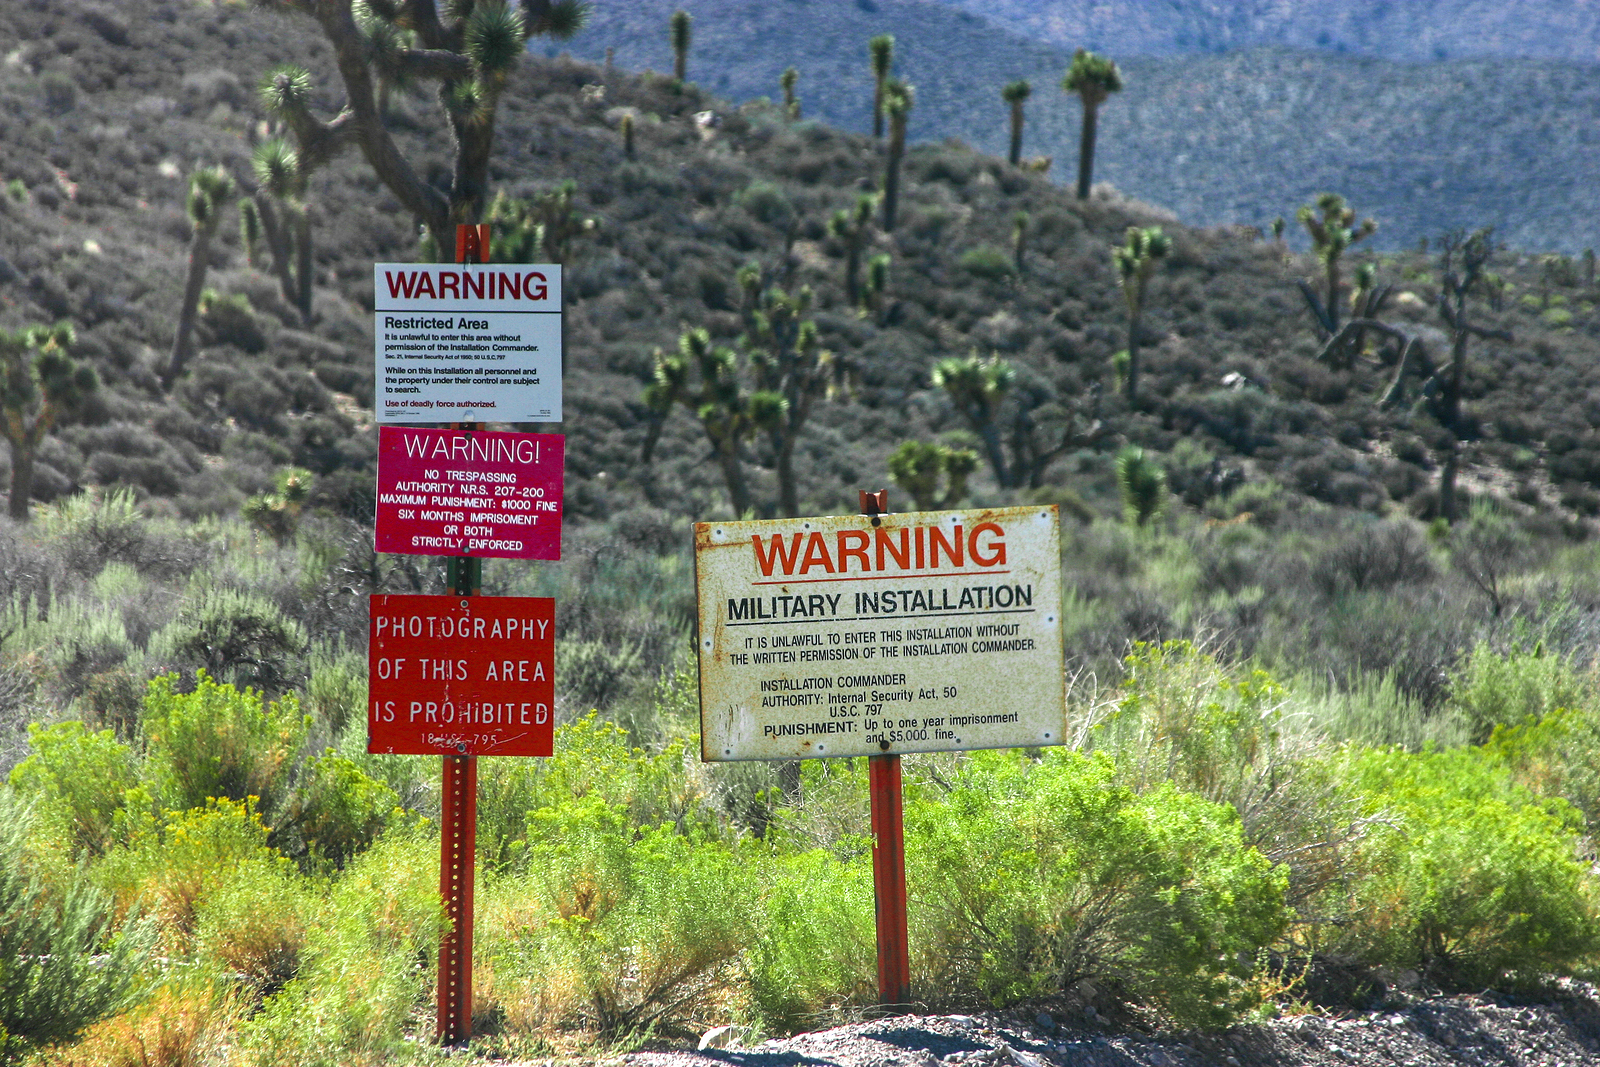 Timeline: How the Area 51 Facebook Event Went From Joke to a Threat